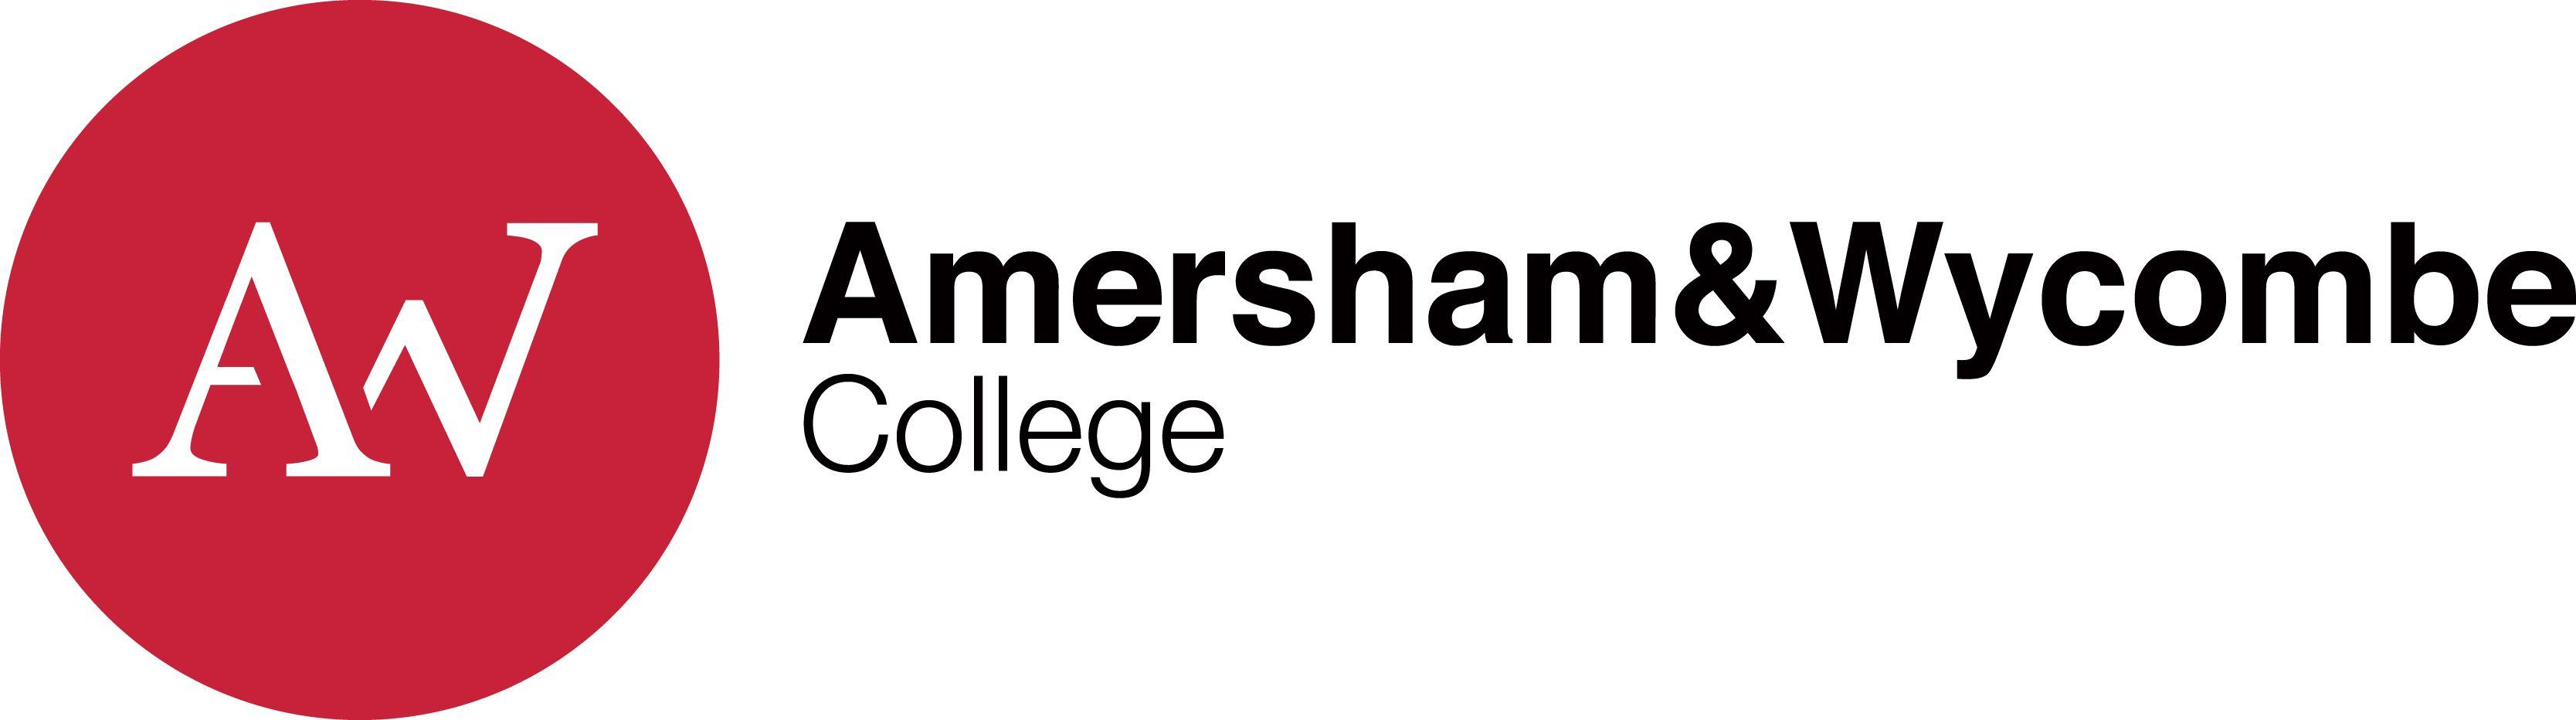 Red and Black College Logo - Amersham and Wycombe College Gain Plaudits for Use of Labour Market ...